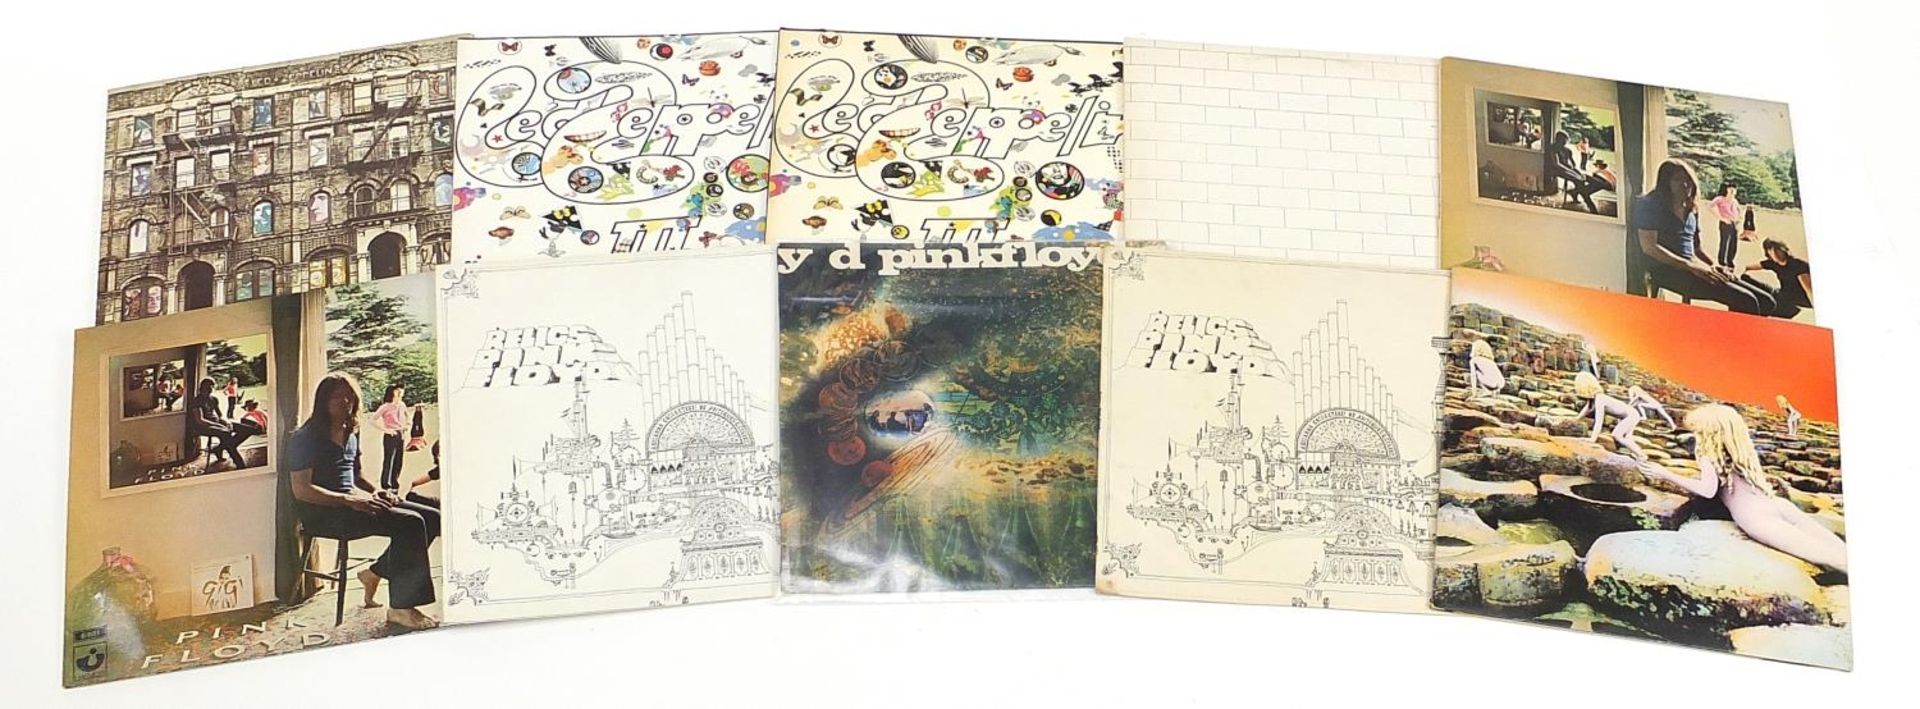 Pink Floyd and Led Zeppelin vinyl LPs including A Saucer Full of Secrets, Houses of the Holy,